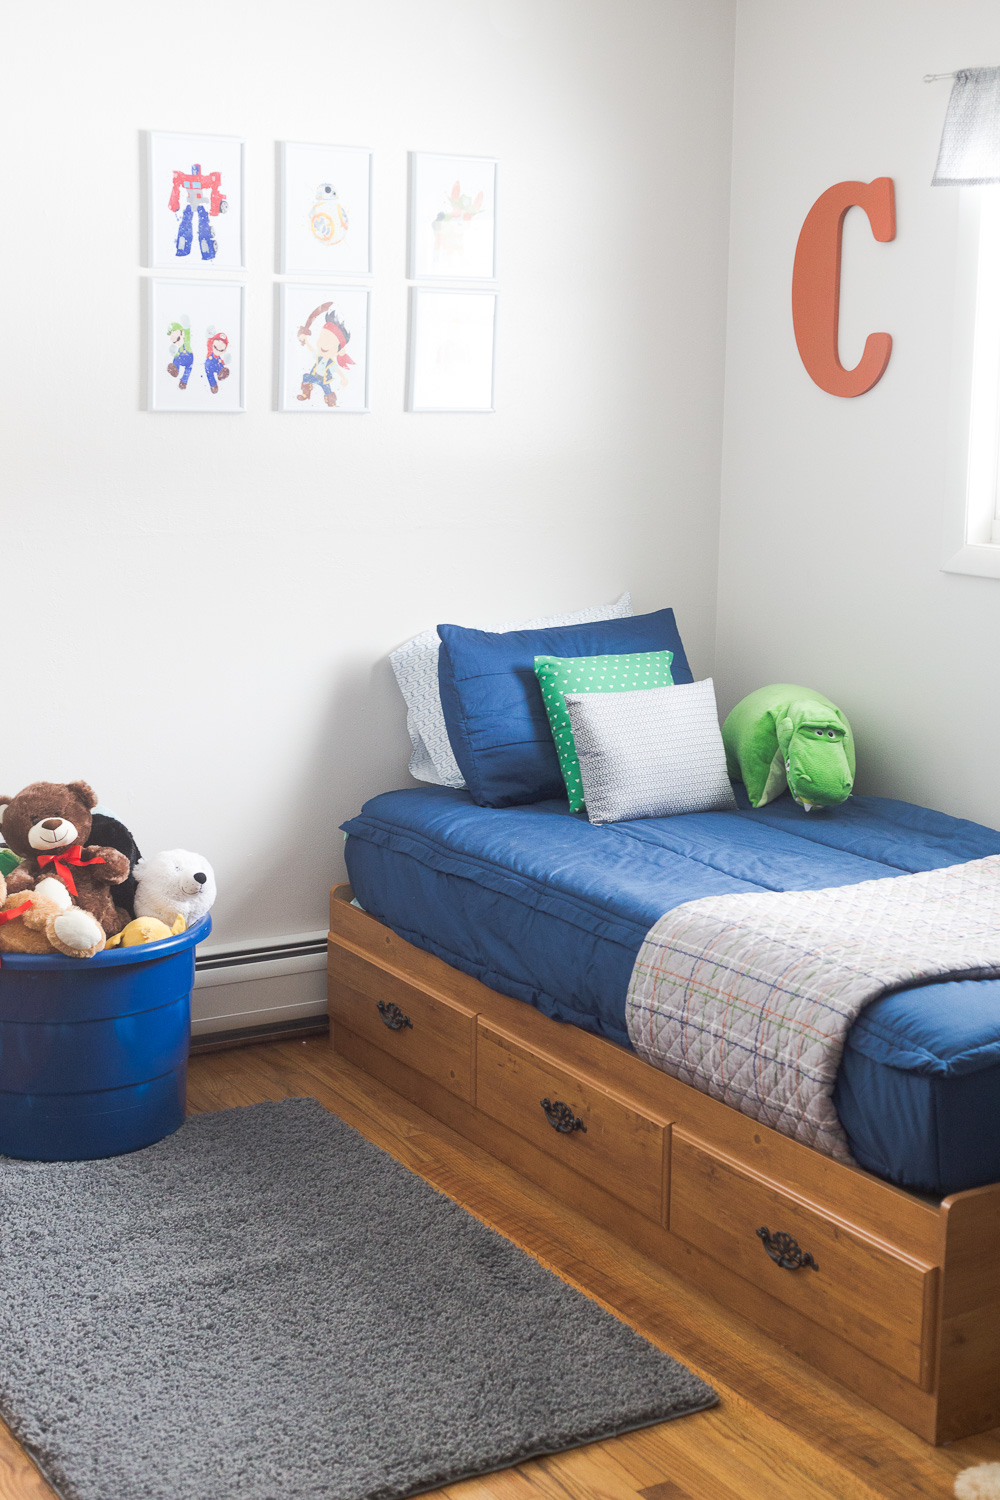 Beddy's Beds | Boys Room Redo | Room for Boys